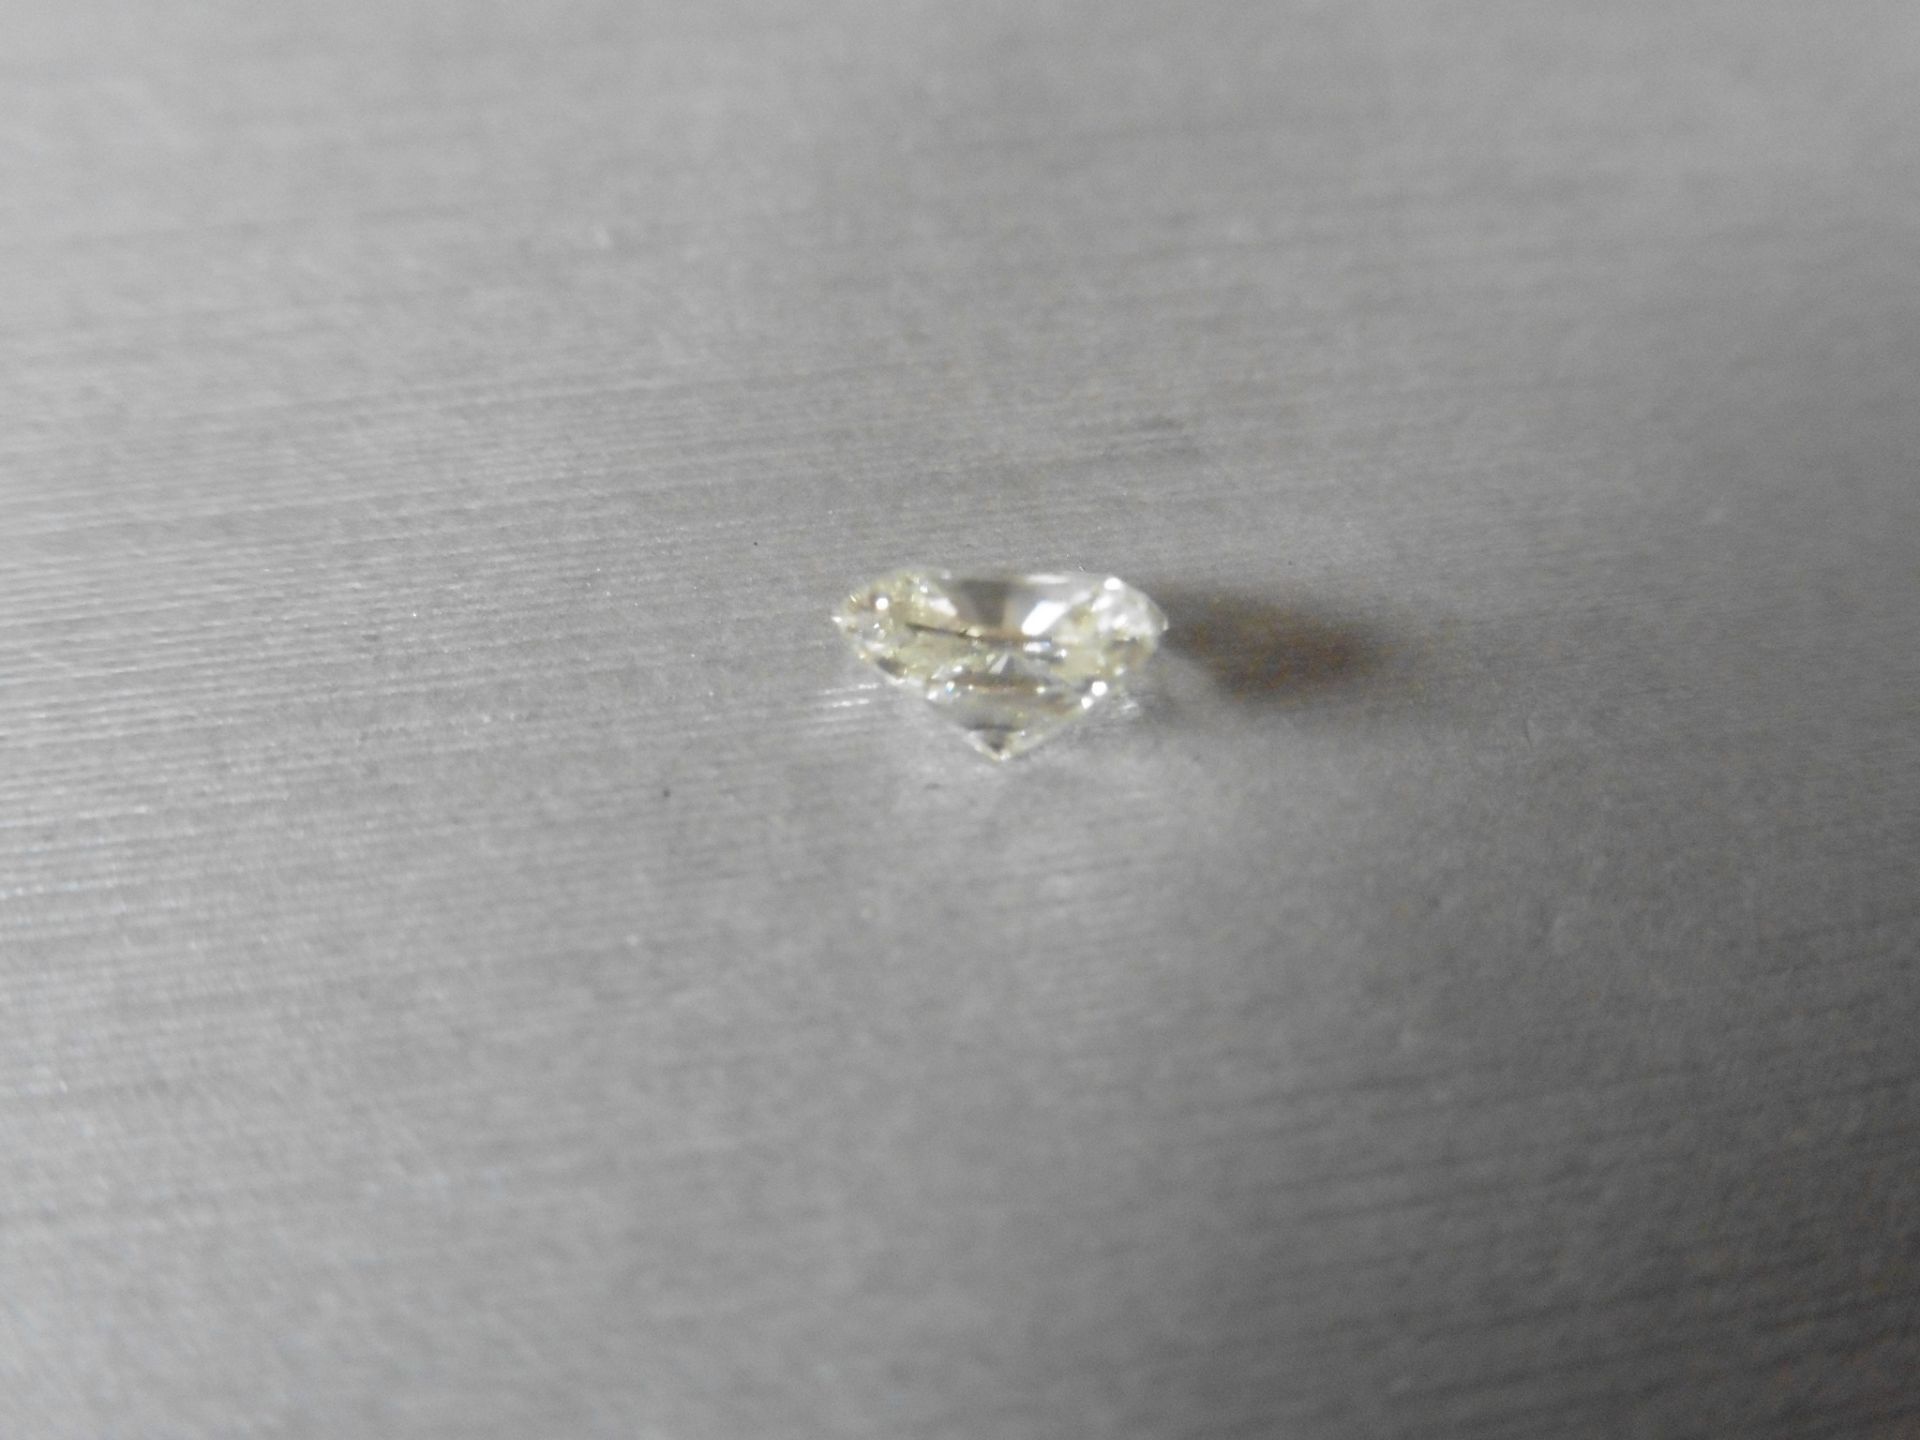 1.03ct loose radiant cut diamond. K colour and VS2 clarity. 6.09 x 5.28 x 3.65mm